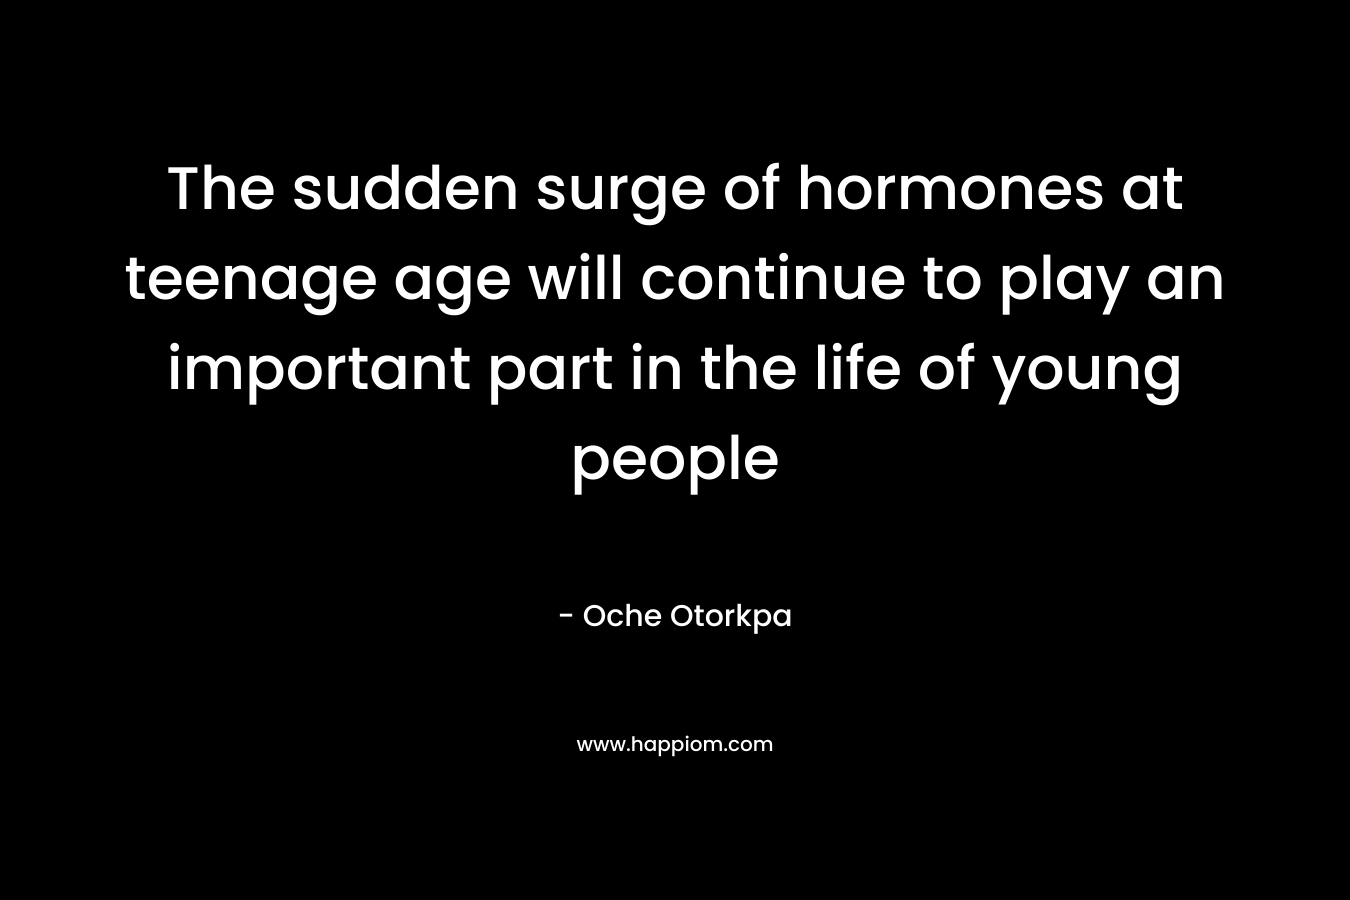 The sudden surge of hormones at teenage age will continue to play an important part in the life of young people – Oche Otorkpa